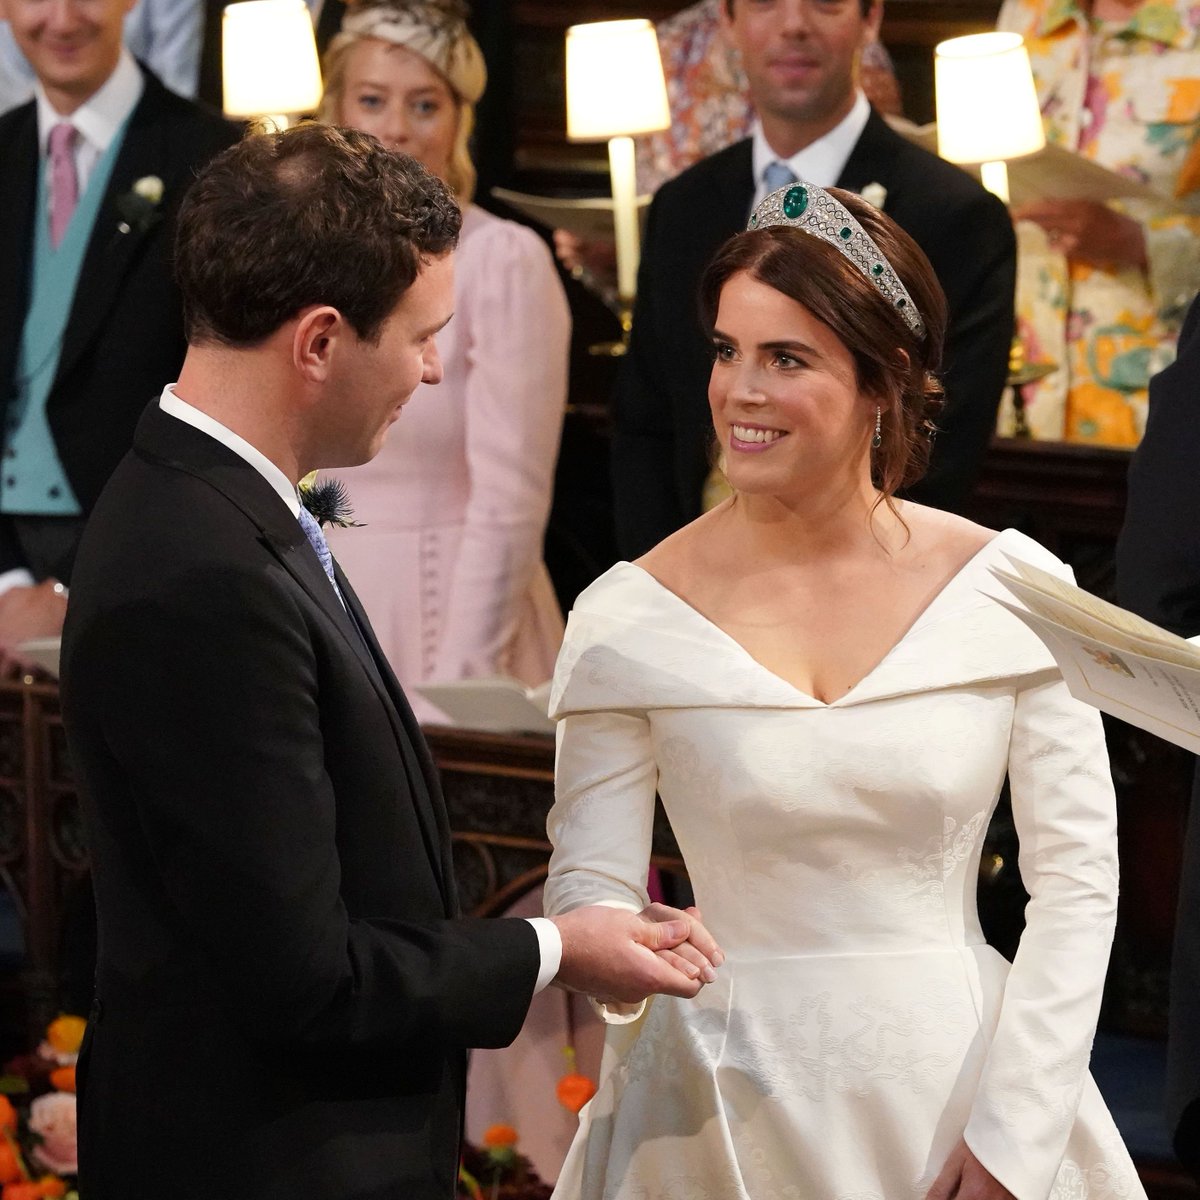 Top 10 Royal Wedding Looks post 2000 -- by Henry VIII. Number One Pick: Princess EugenieI can't find a single fault with this look. Dress, Tiara, Makeup... all perfection. Most importantly she looked happy and healthy.  #royalwedding  #PrincessEugenie